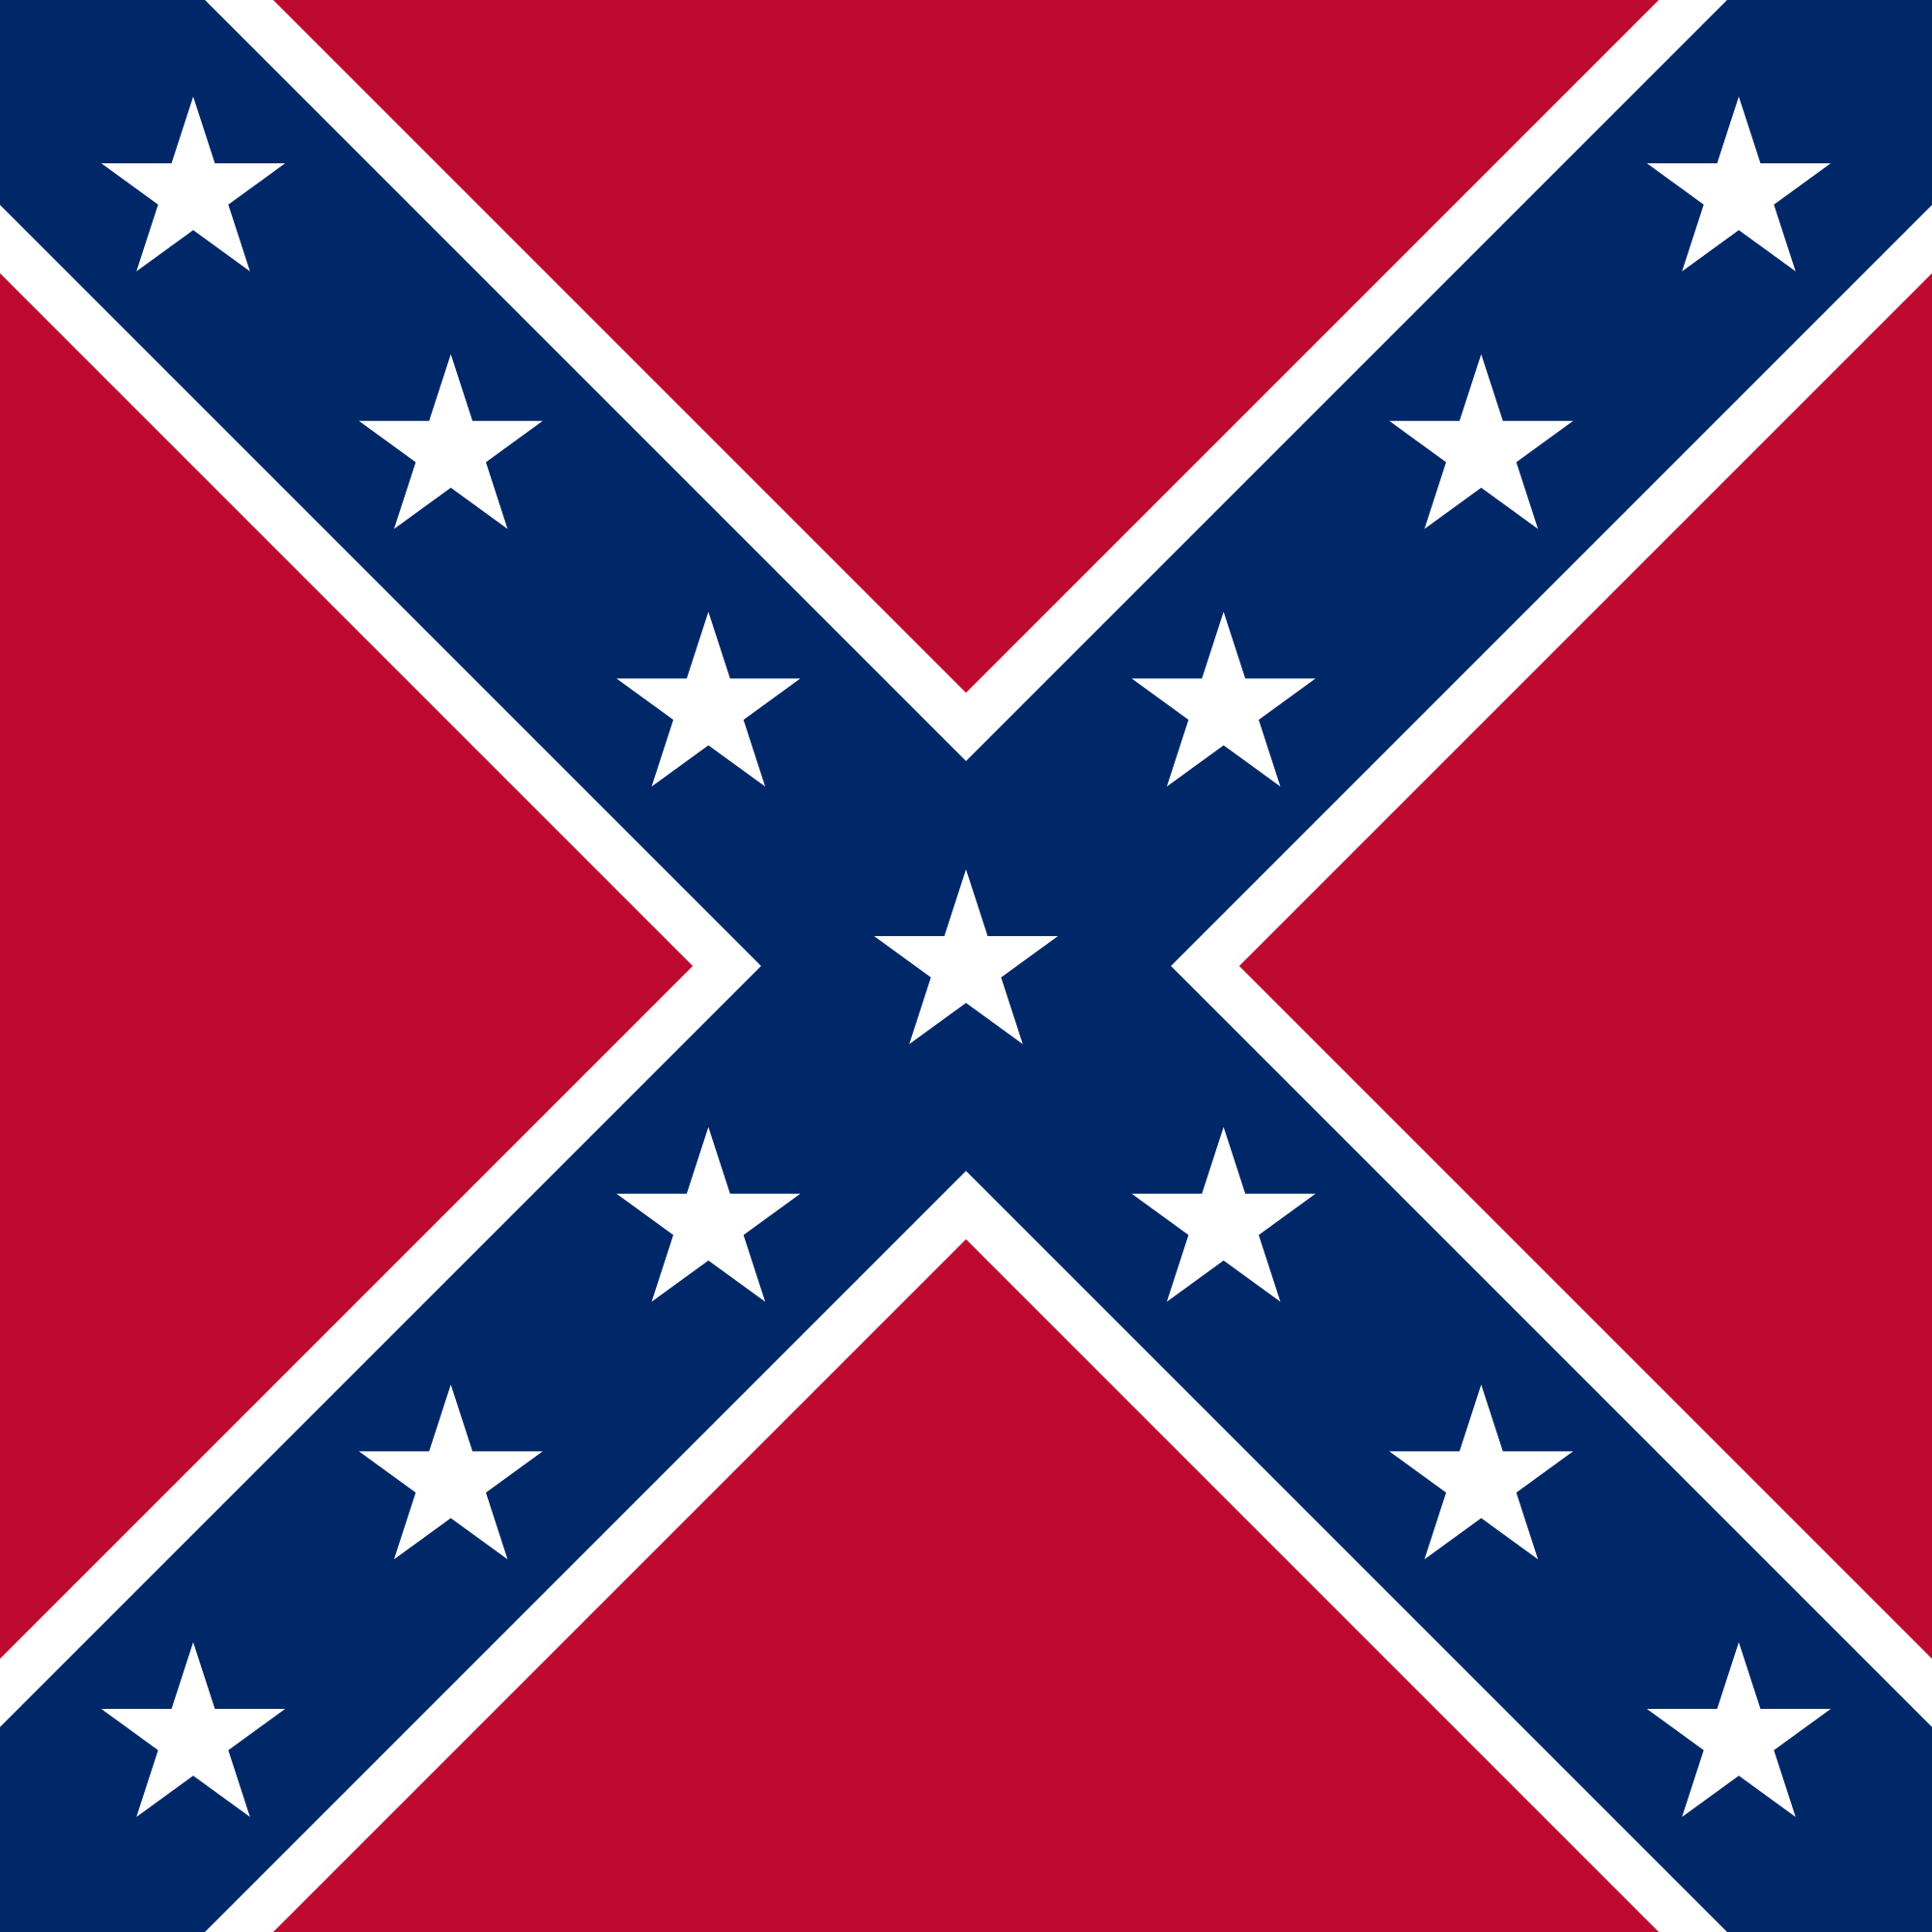 2000px-Battle_flag_of_the_Confederate_States_of_America.svg.png